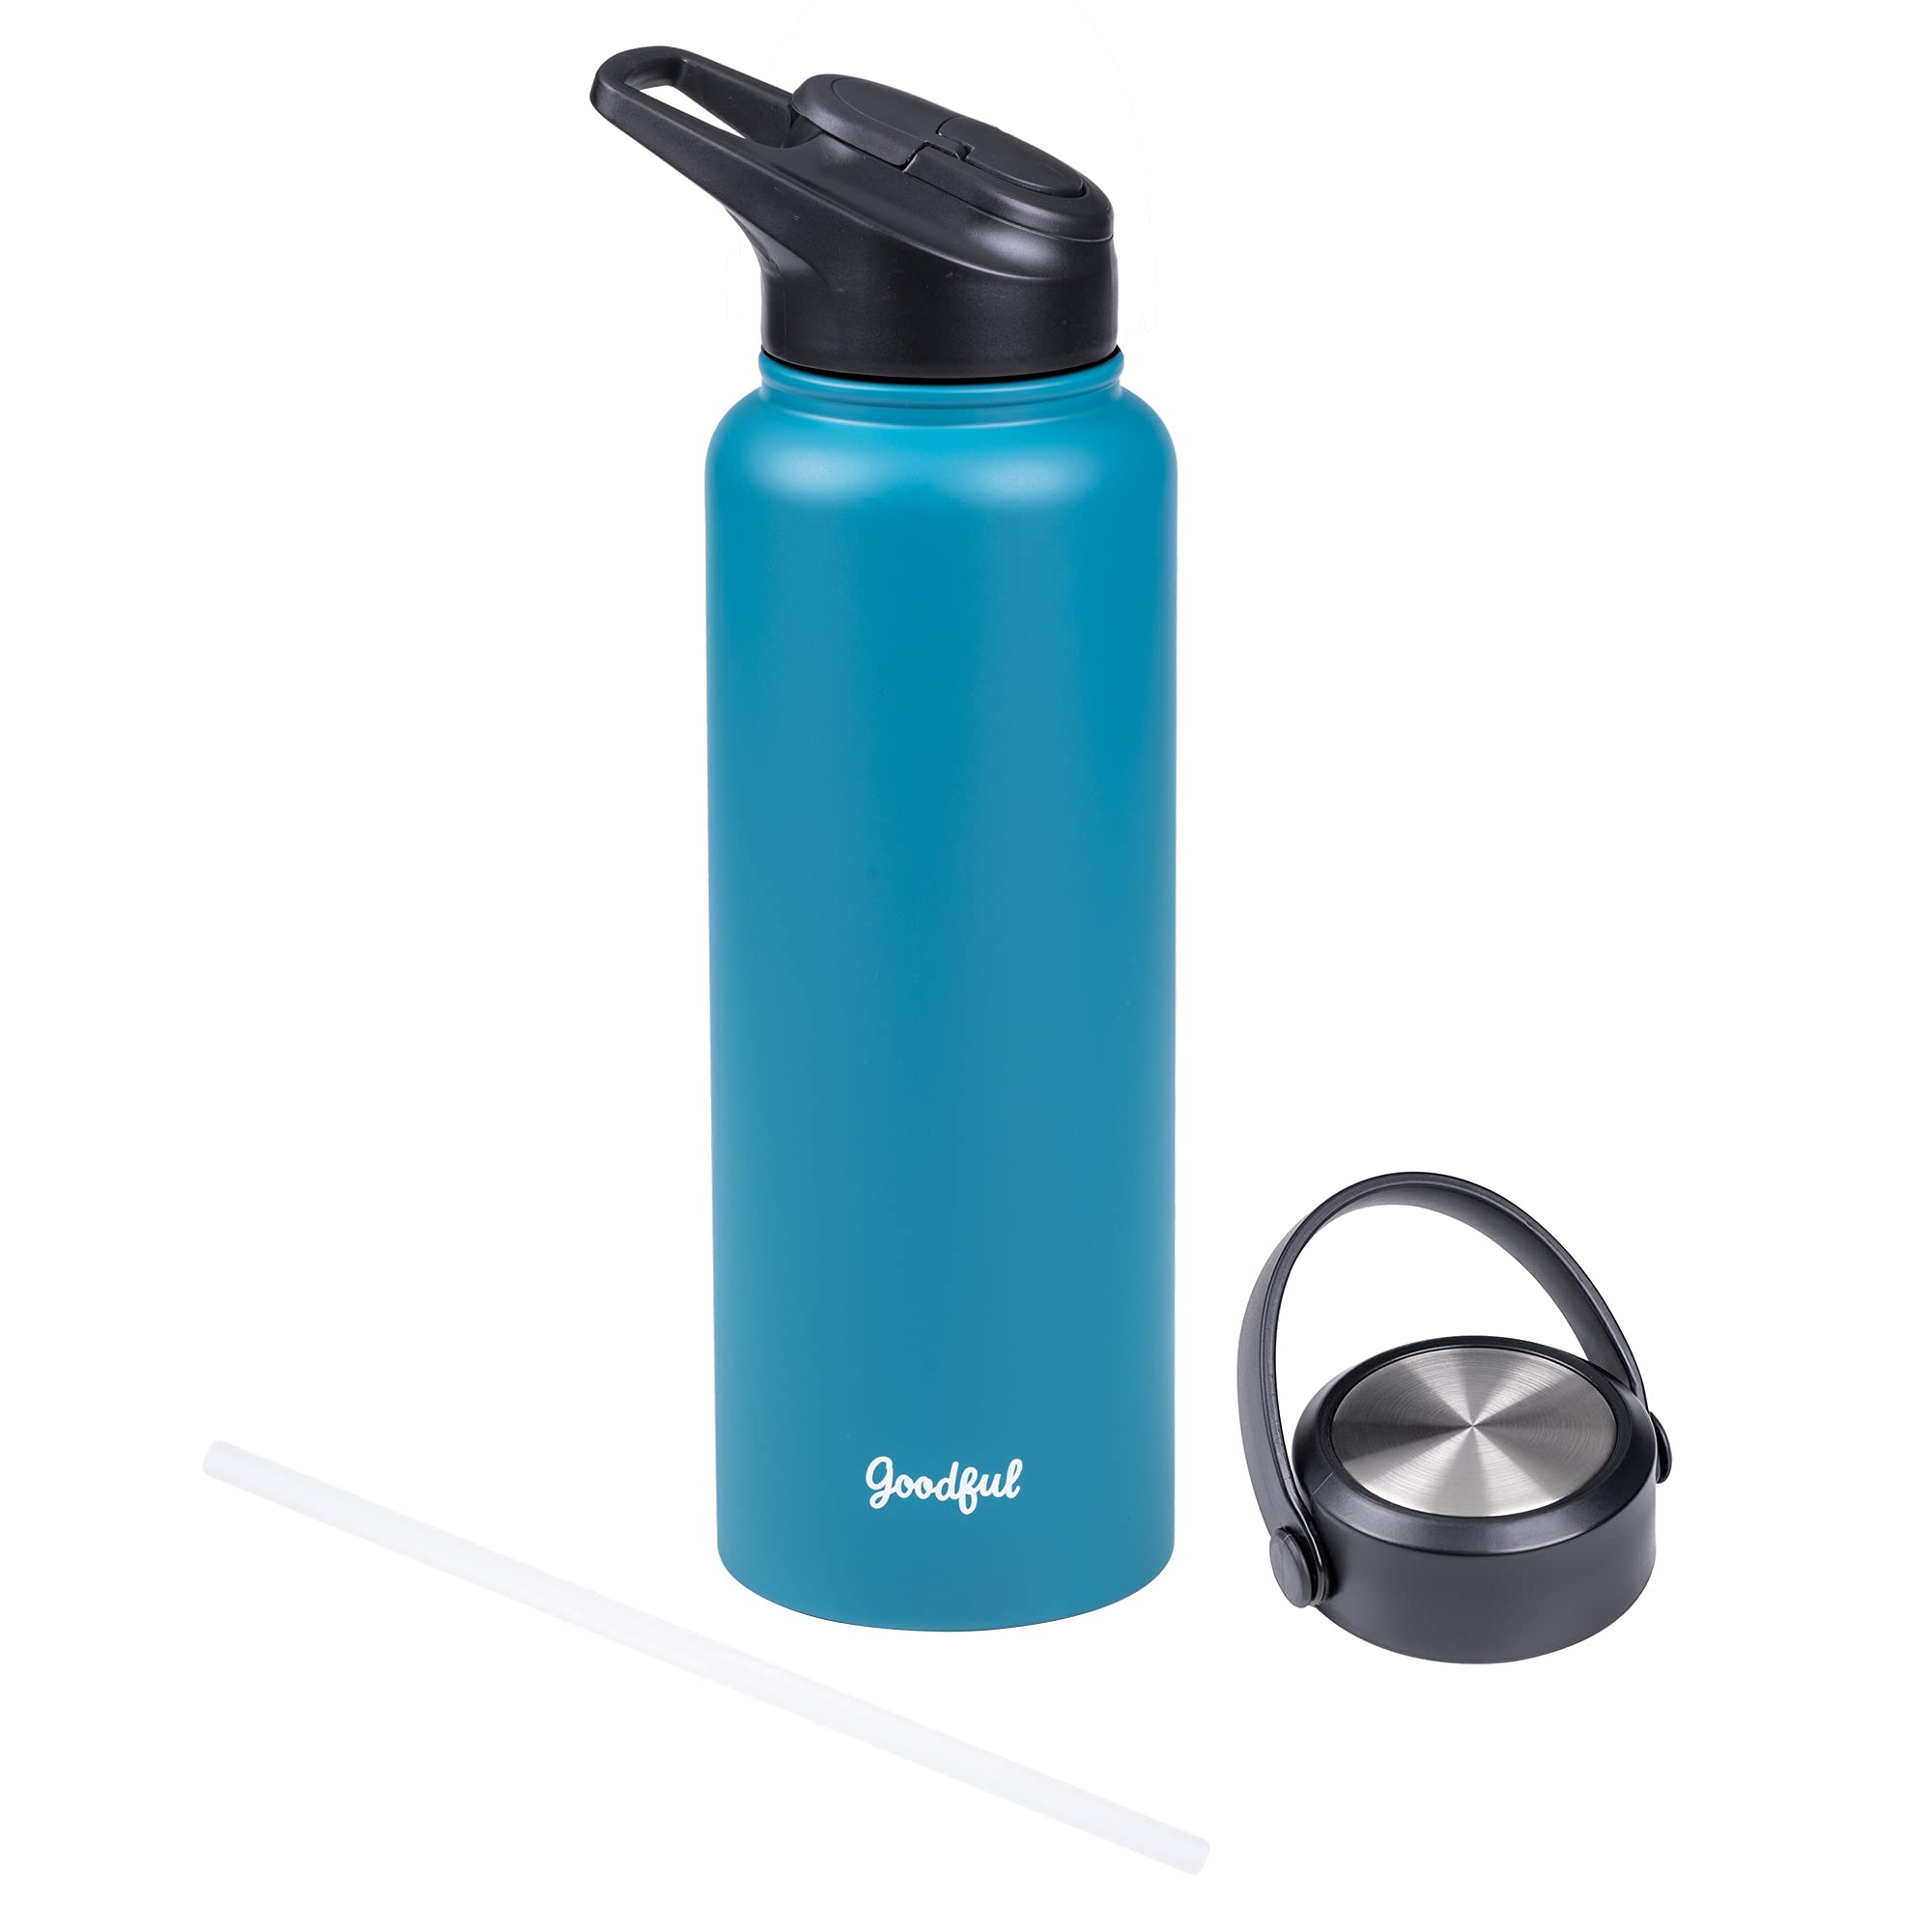 40-Oz Goodful Double Wall Vacuum Sealed Water Bottle w/ Two Interchangeable Lids (Teal) $9.90 + Free Shipping w/ Prime or on orders over $25